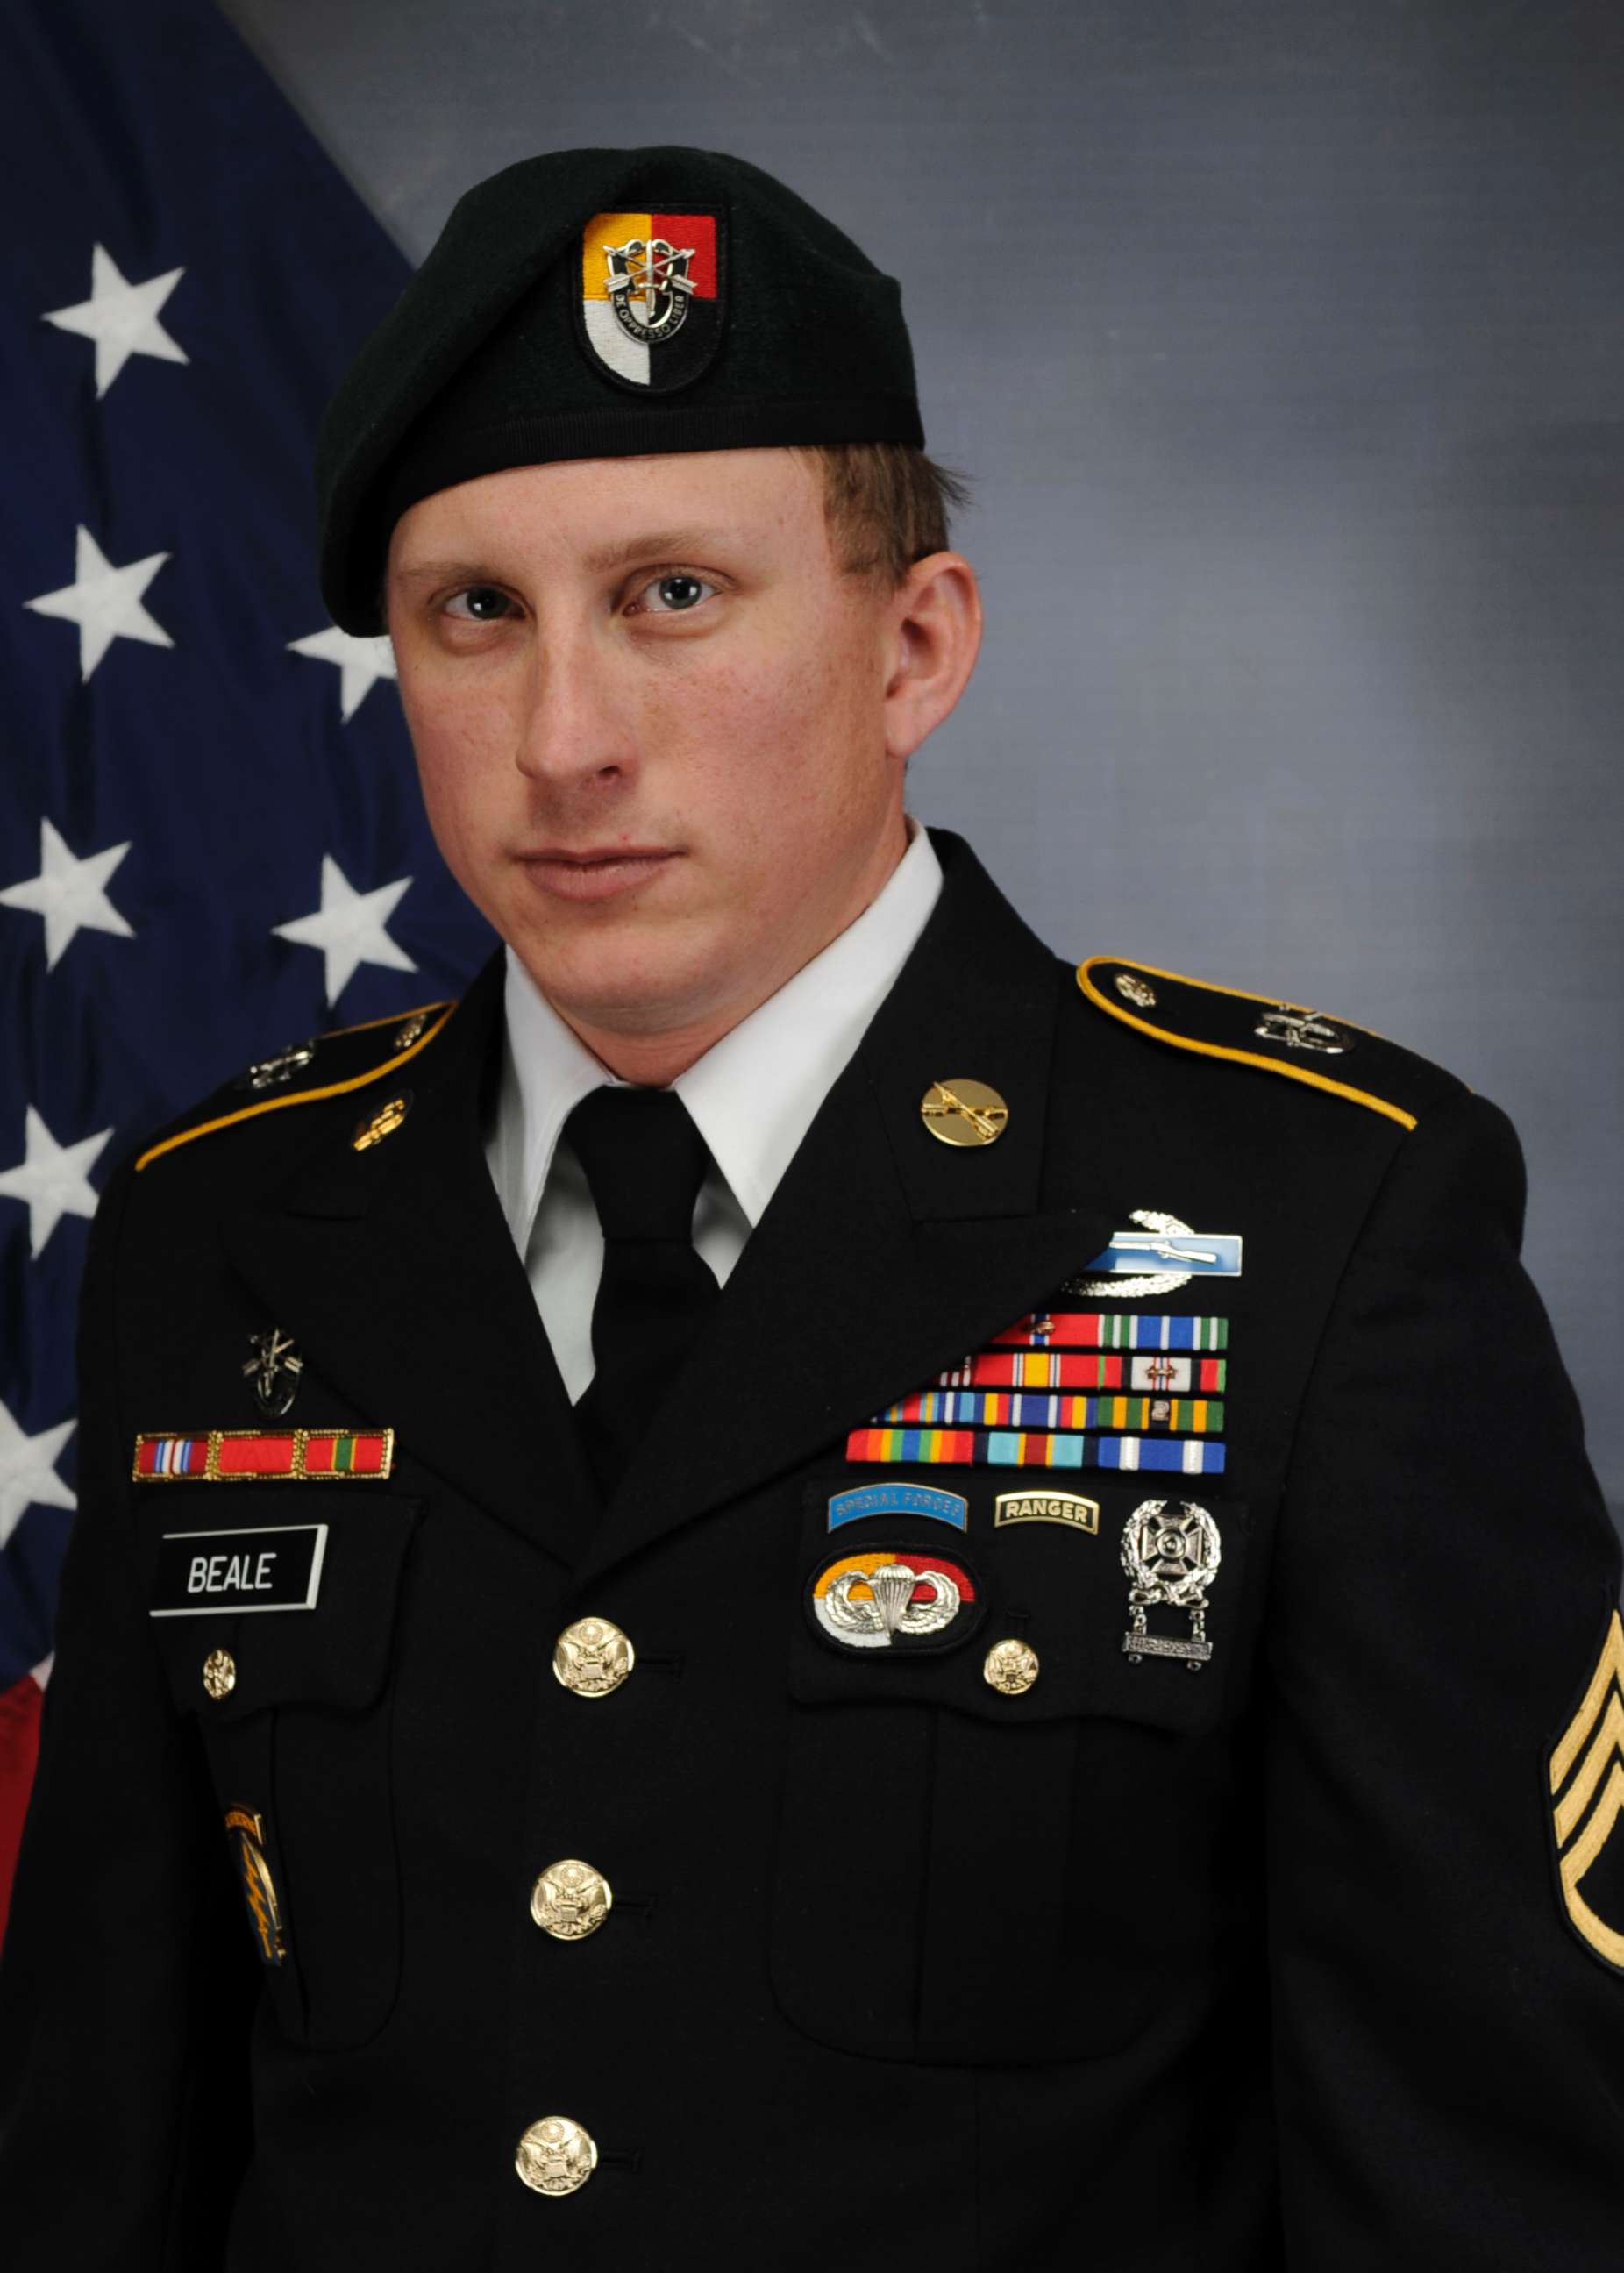 PHOTO: U.S. Army Special Forces Sgt. 1st Class Joshua "Zach" Beale was killed, Jan. 22, 2019, in Uruzgan Province, Afghanistan.